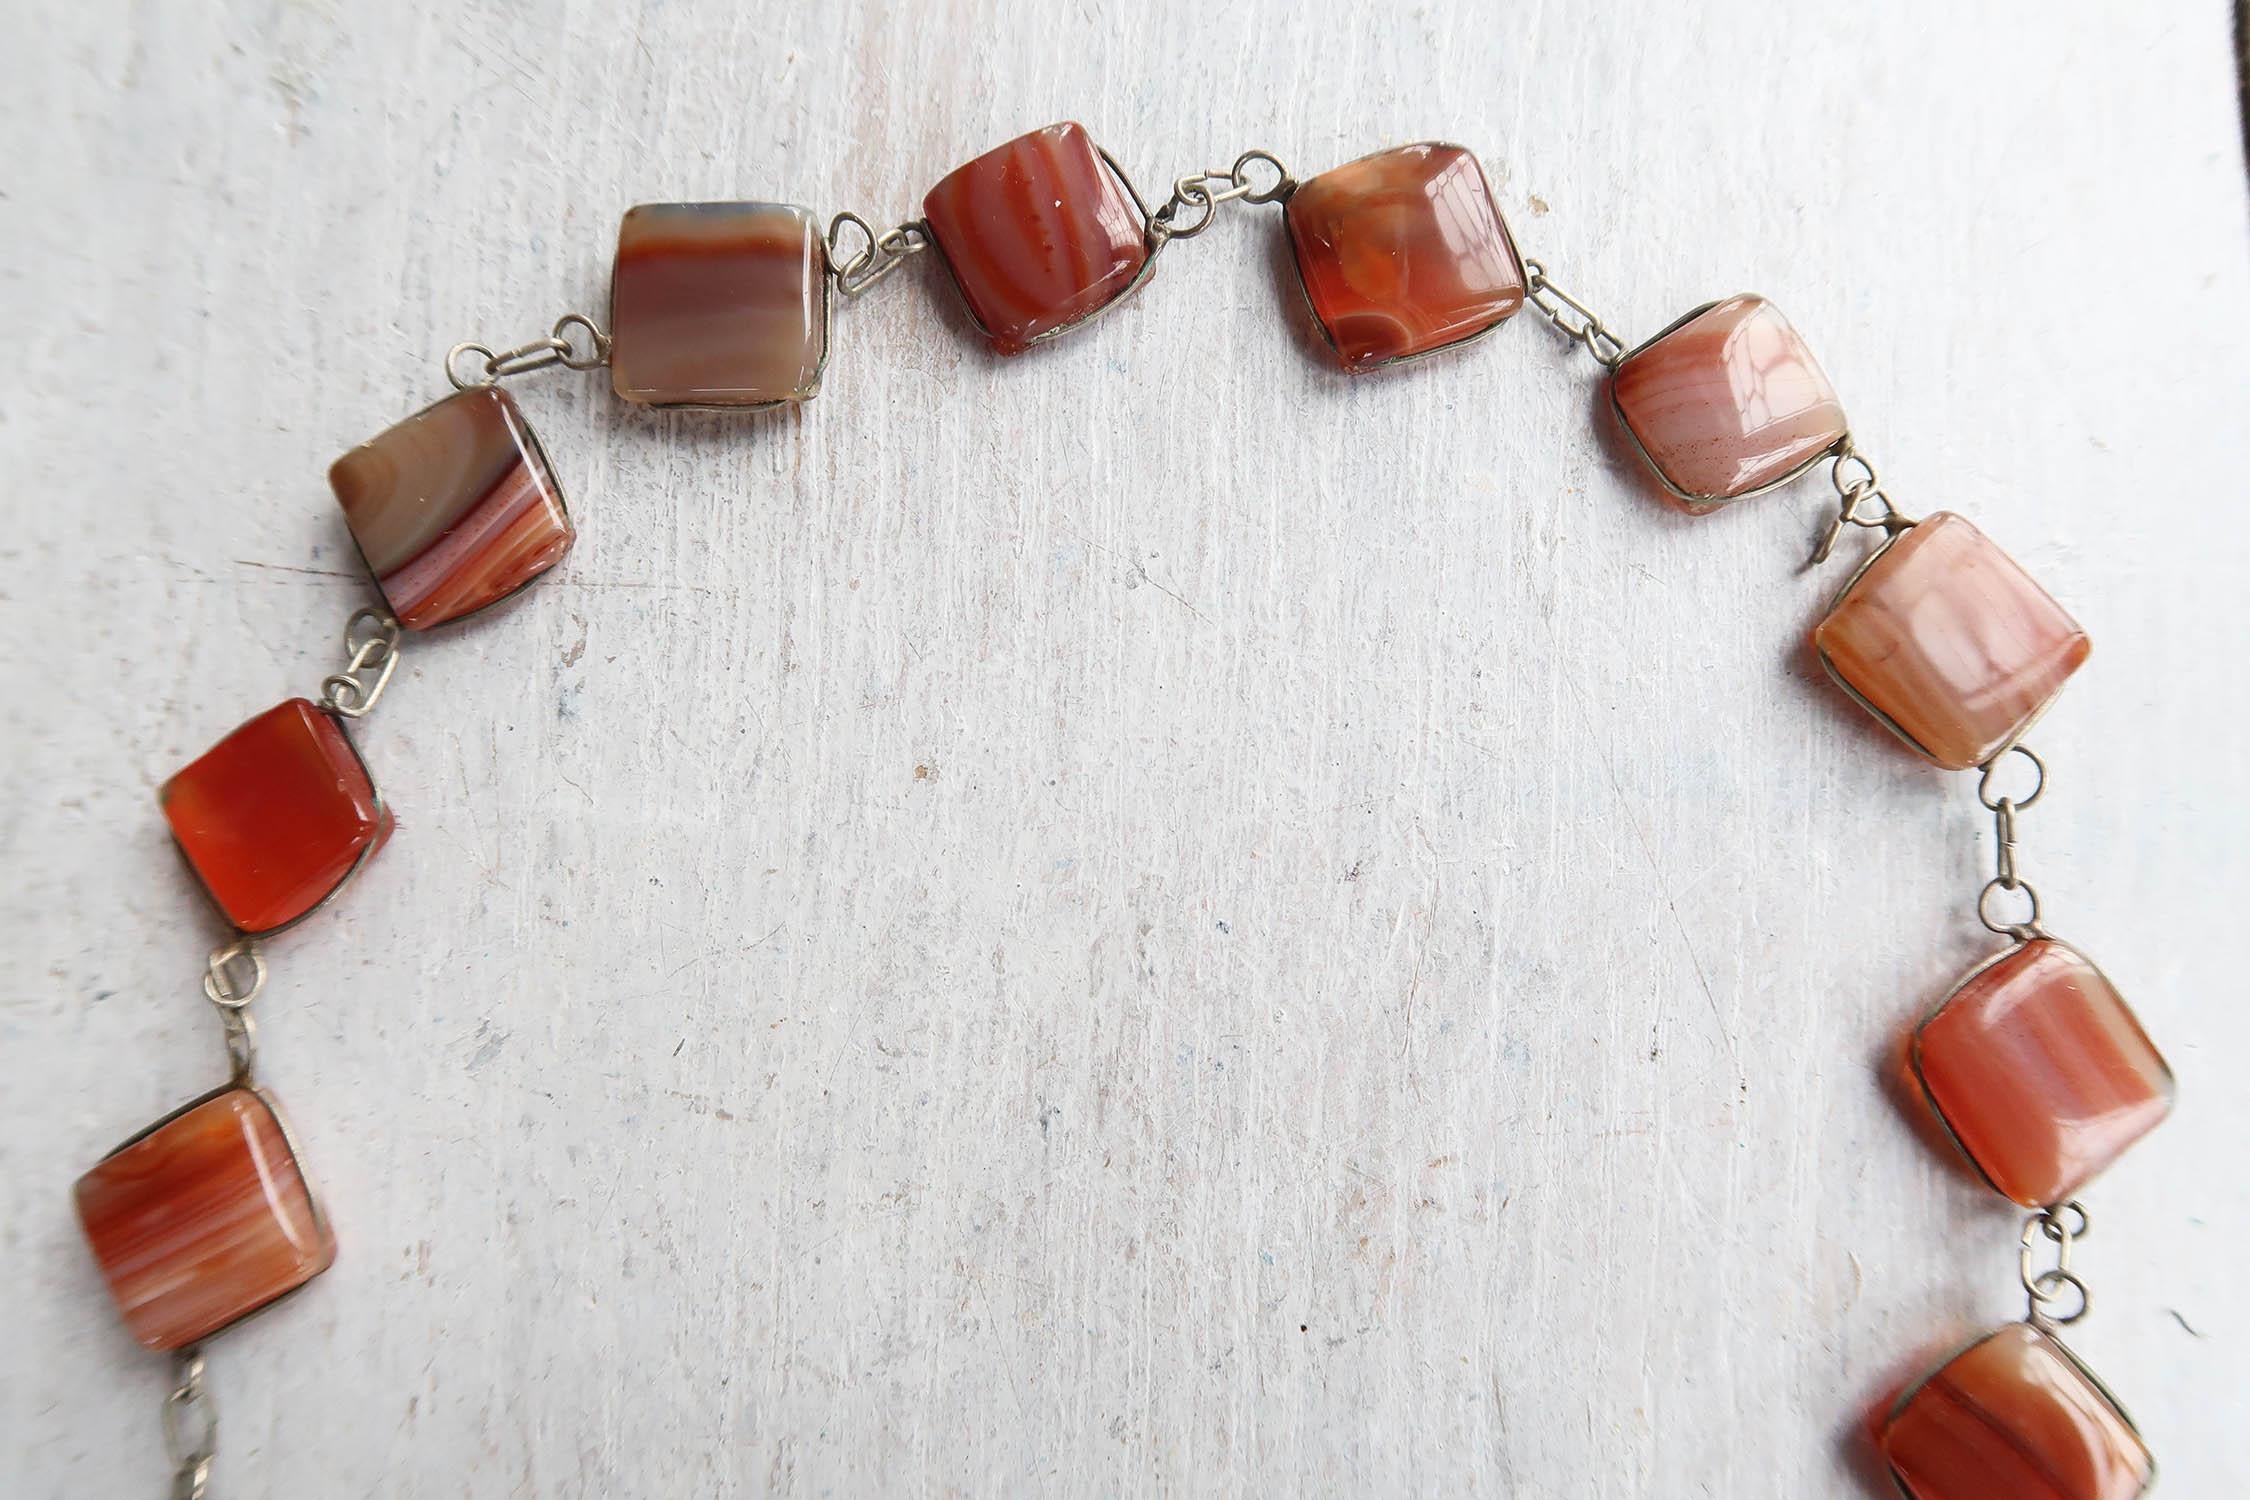 English Vintage 1960's Costume Jewelry- A Carnelian Necklace. For Sale